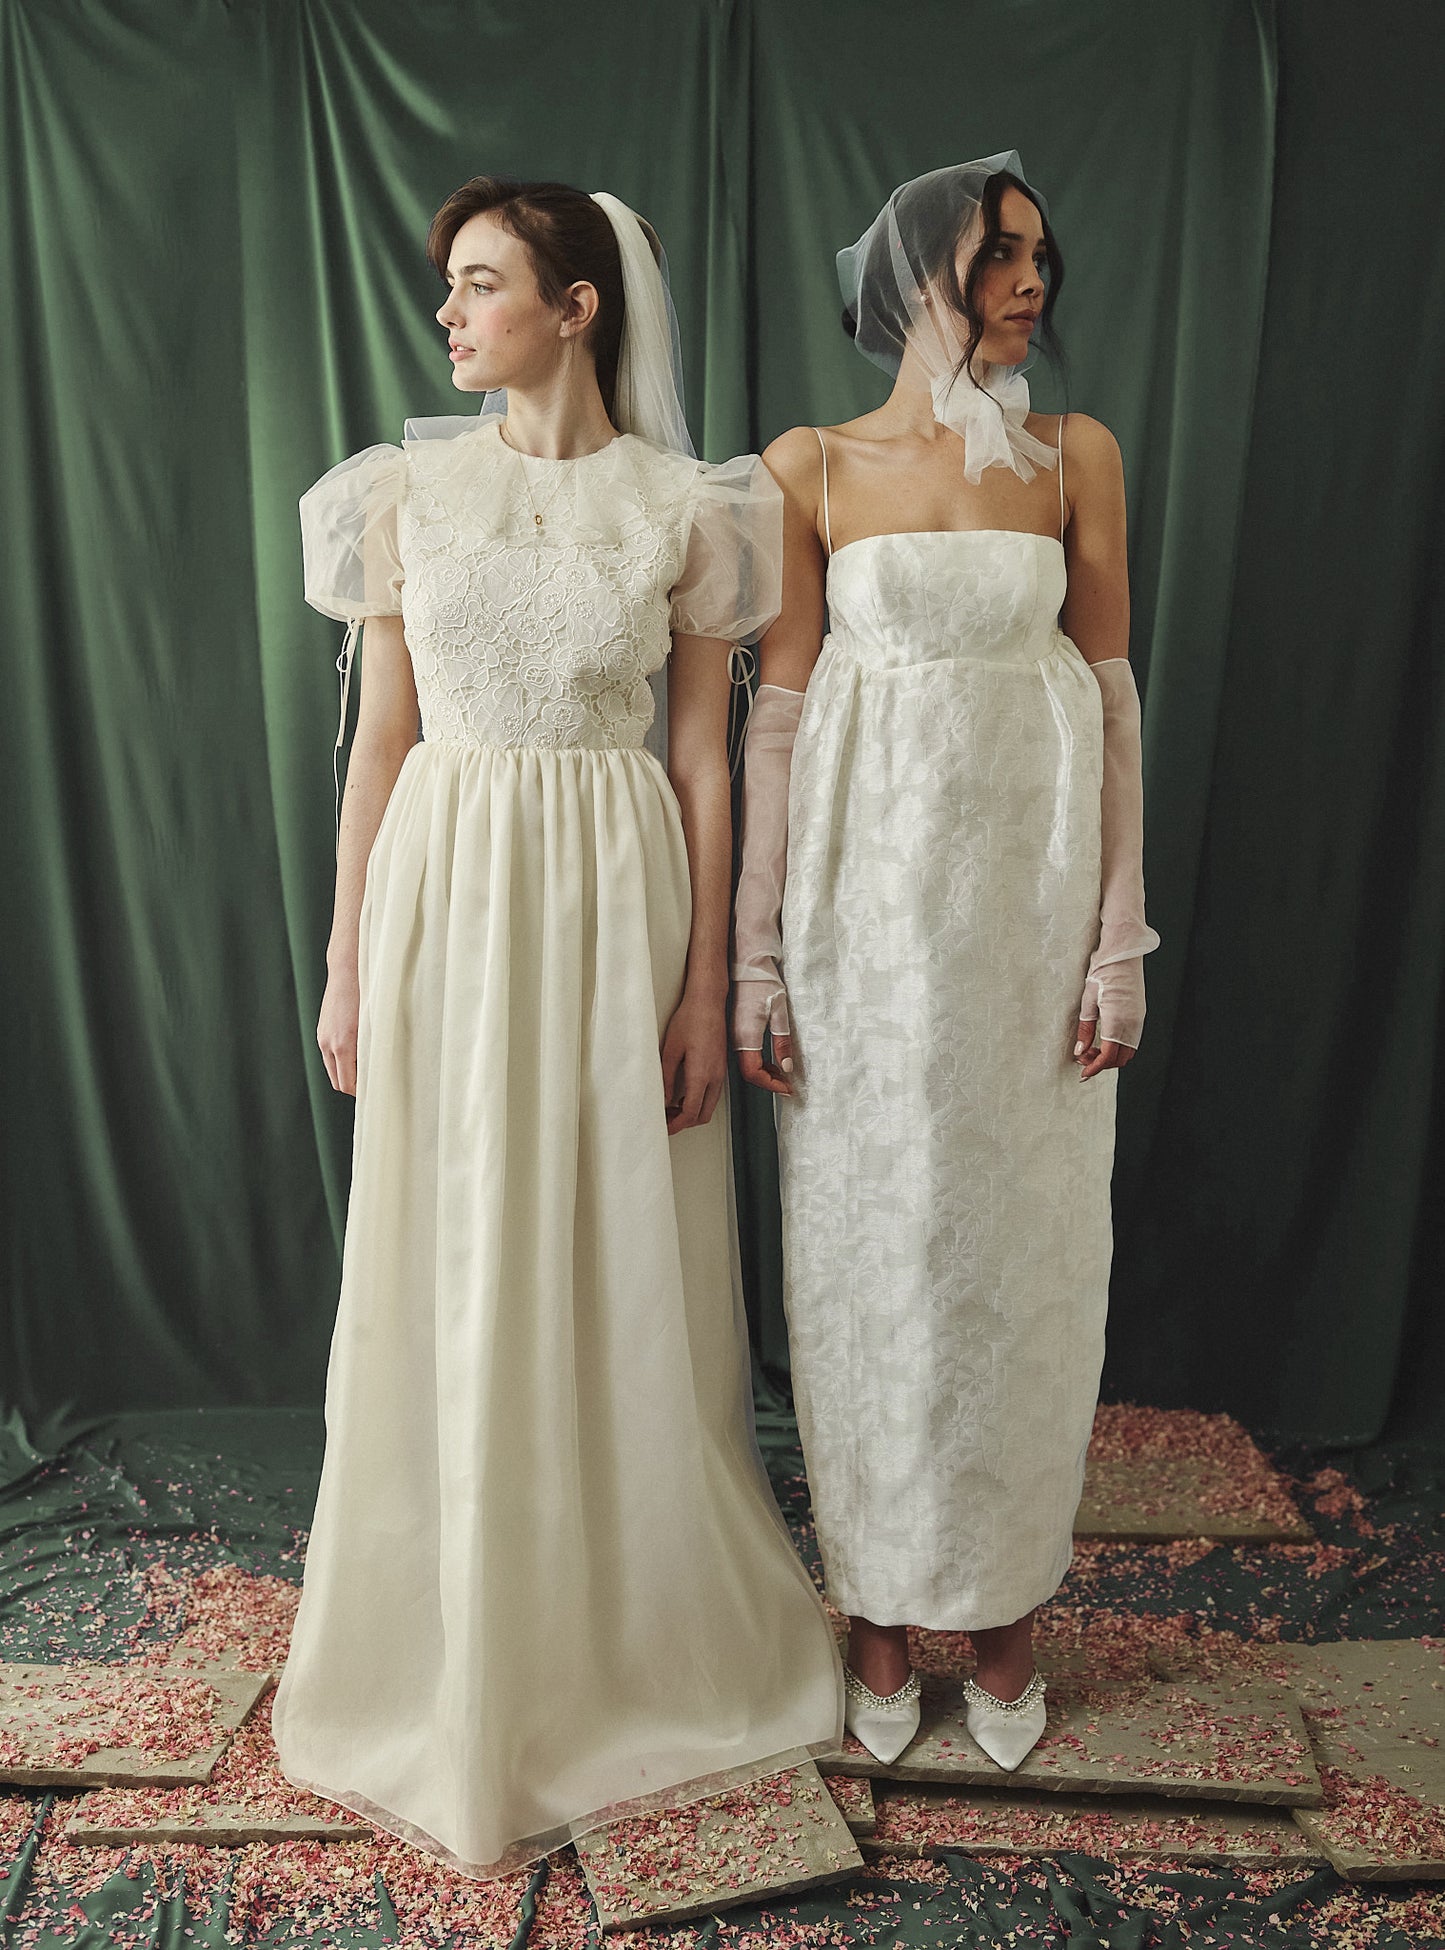 The Romilly Gown